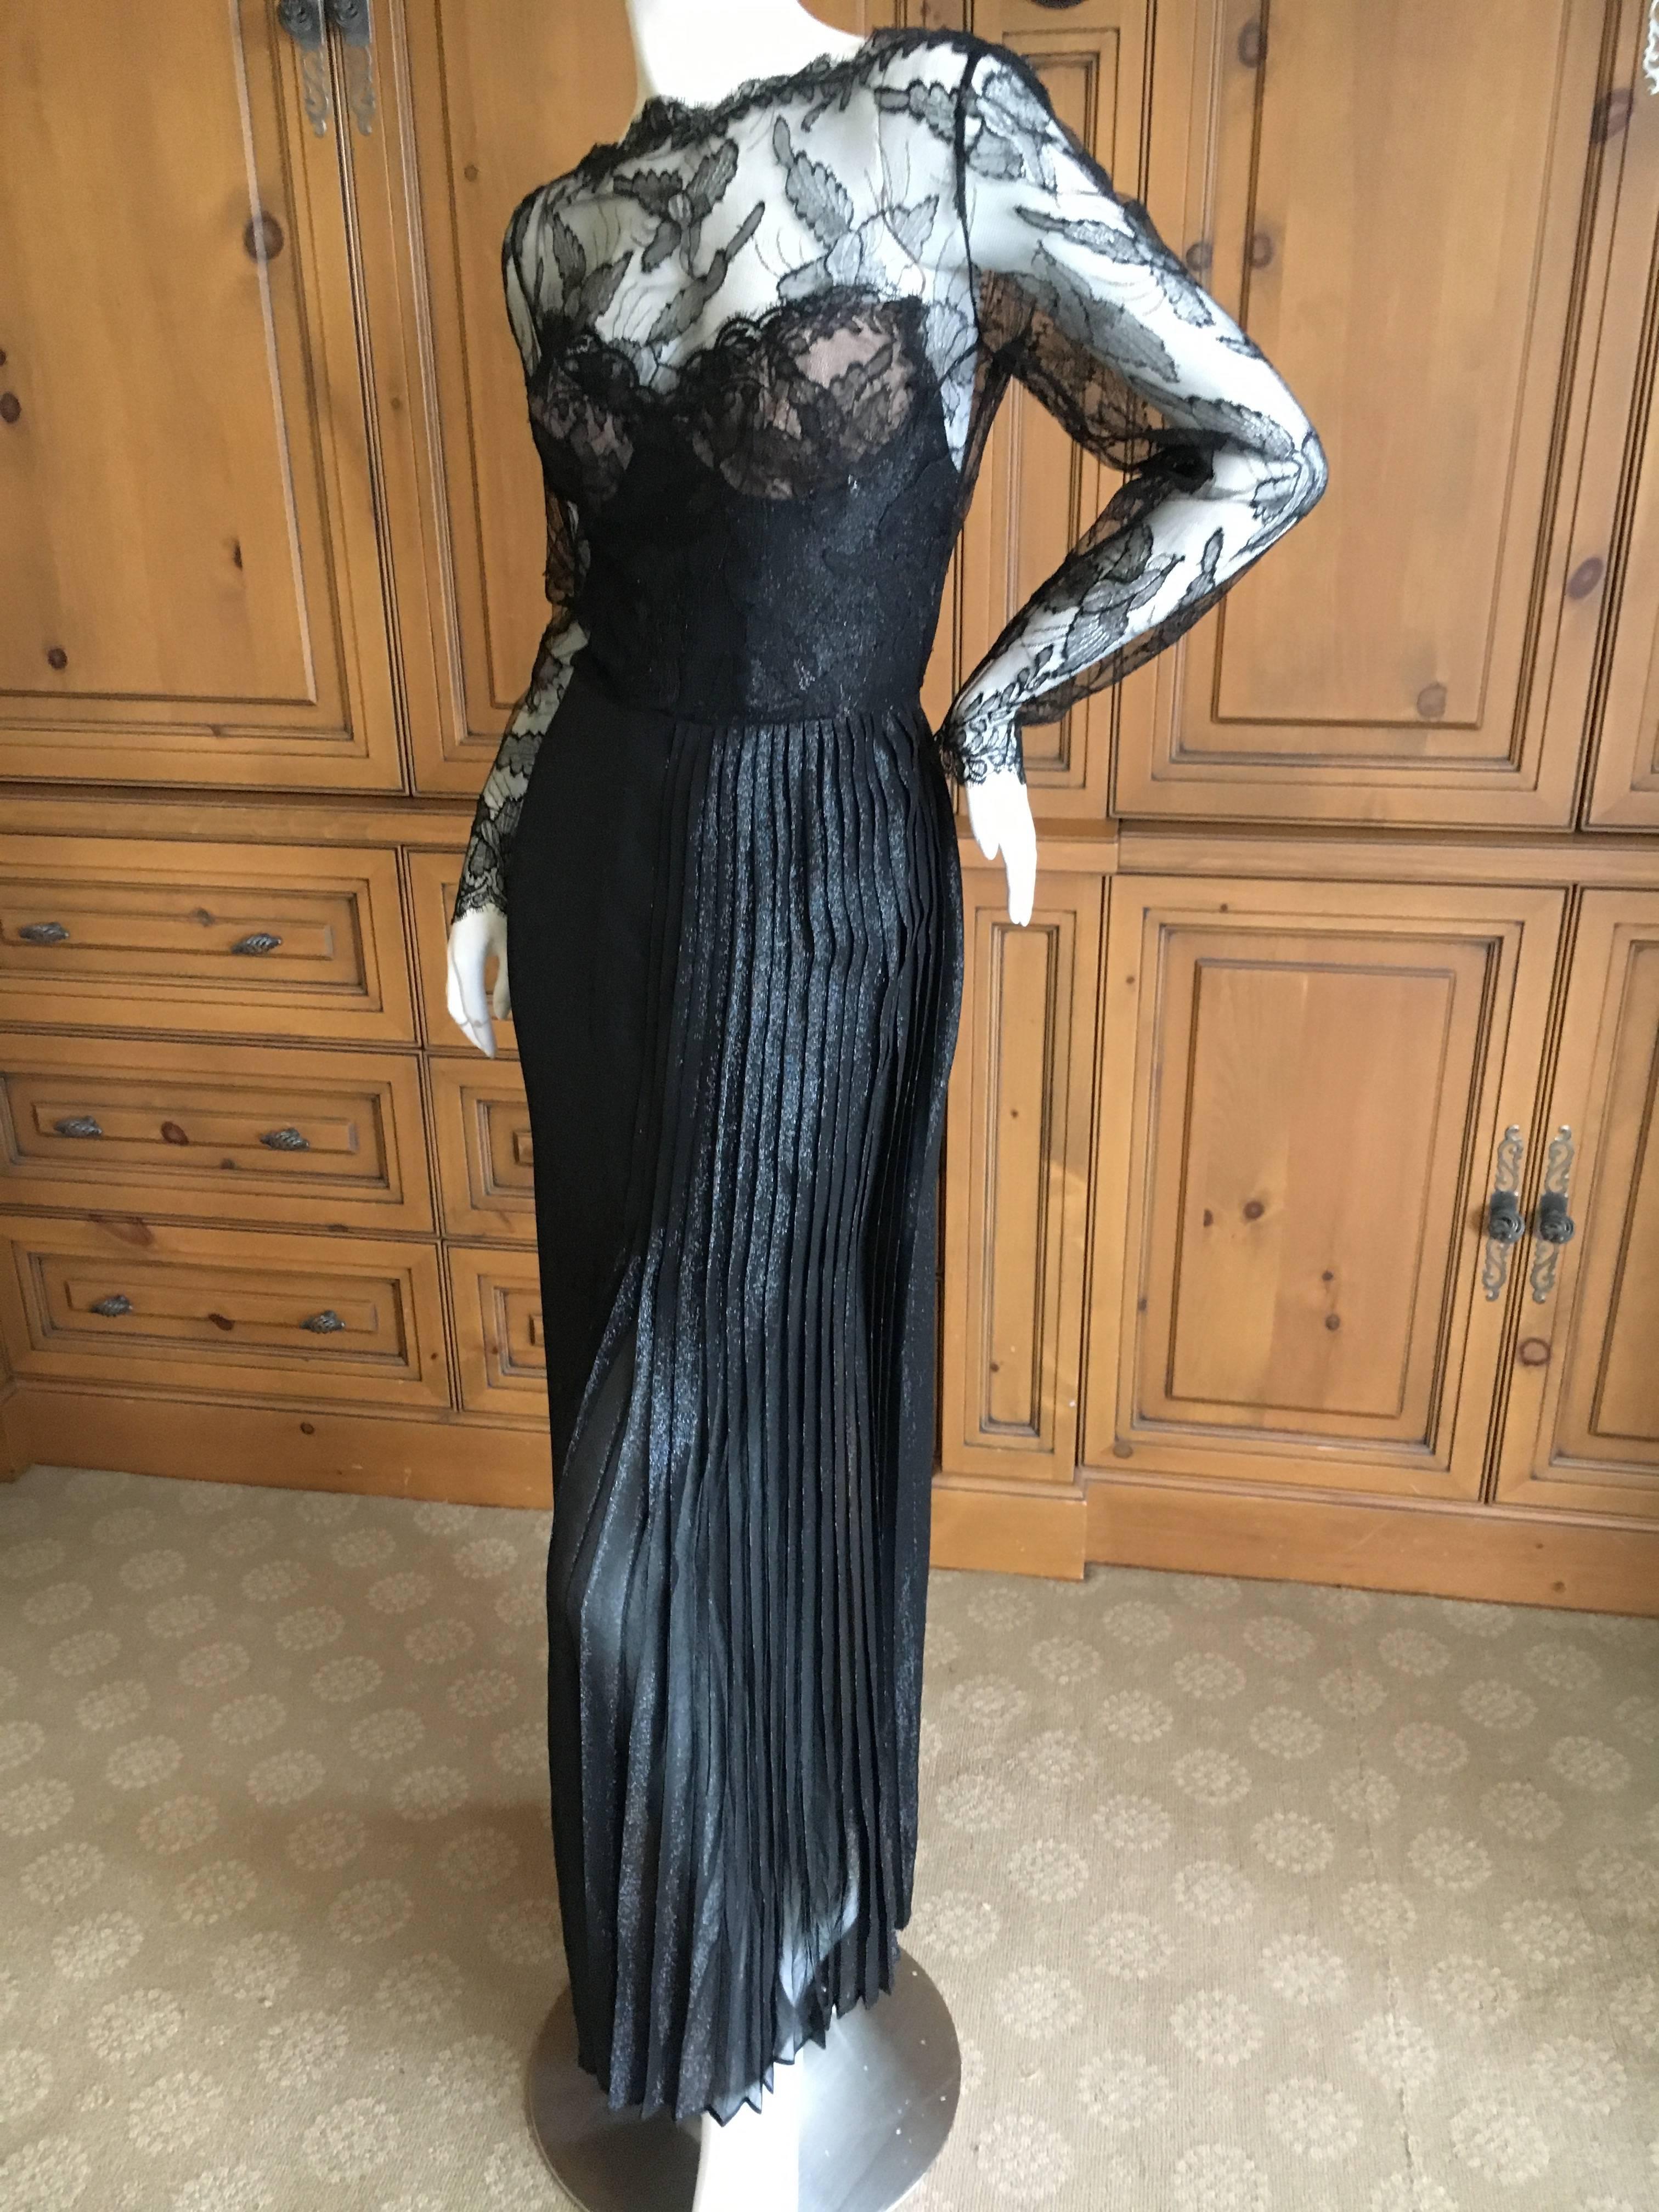 Galanos Black Lace Evening Dress with Pleated Skirt In Excellent Condition For Sale In Cloverdale, CA